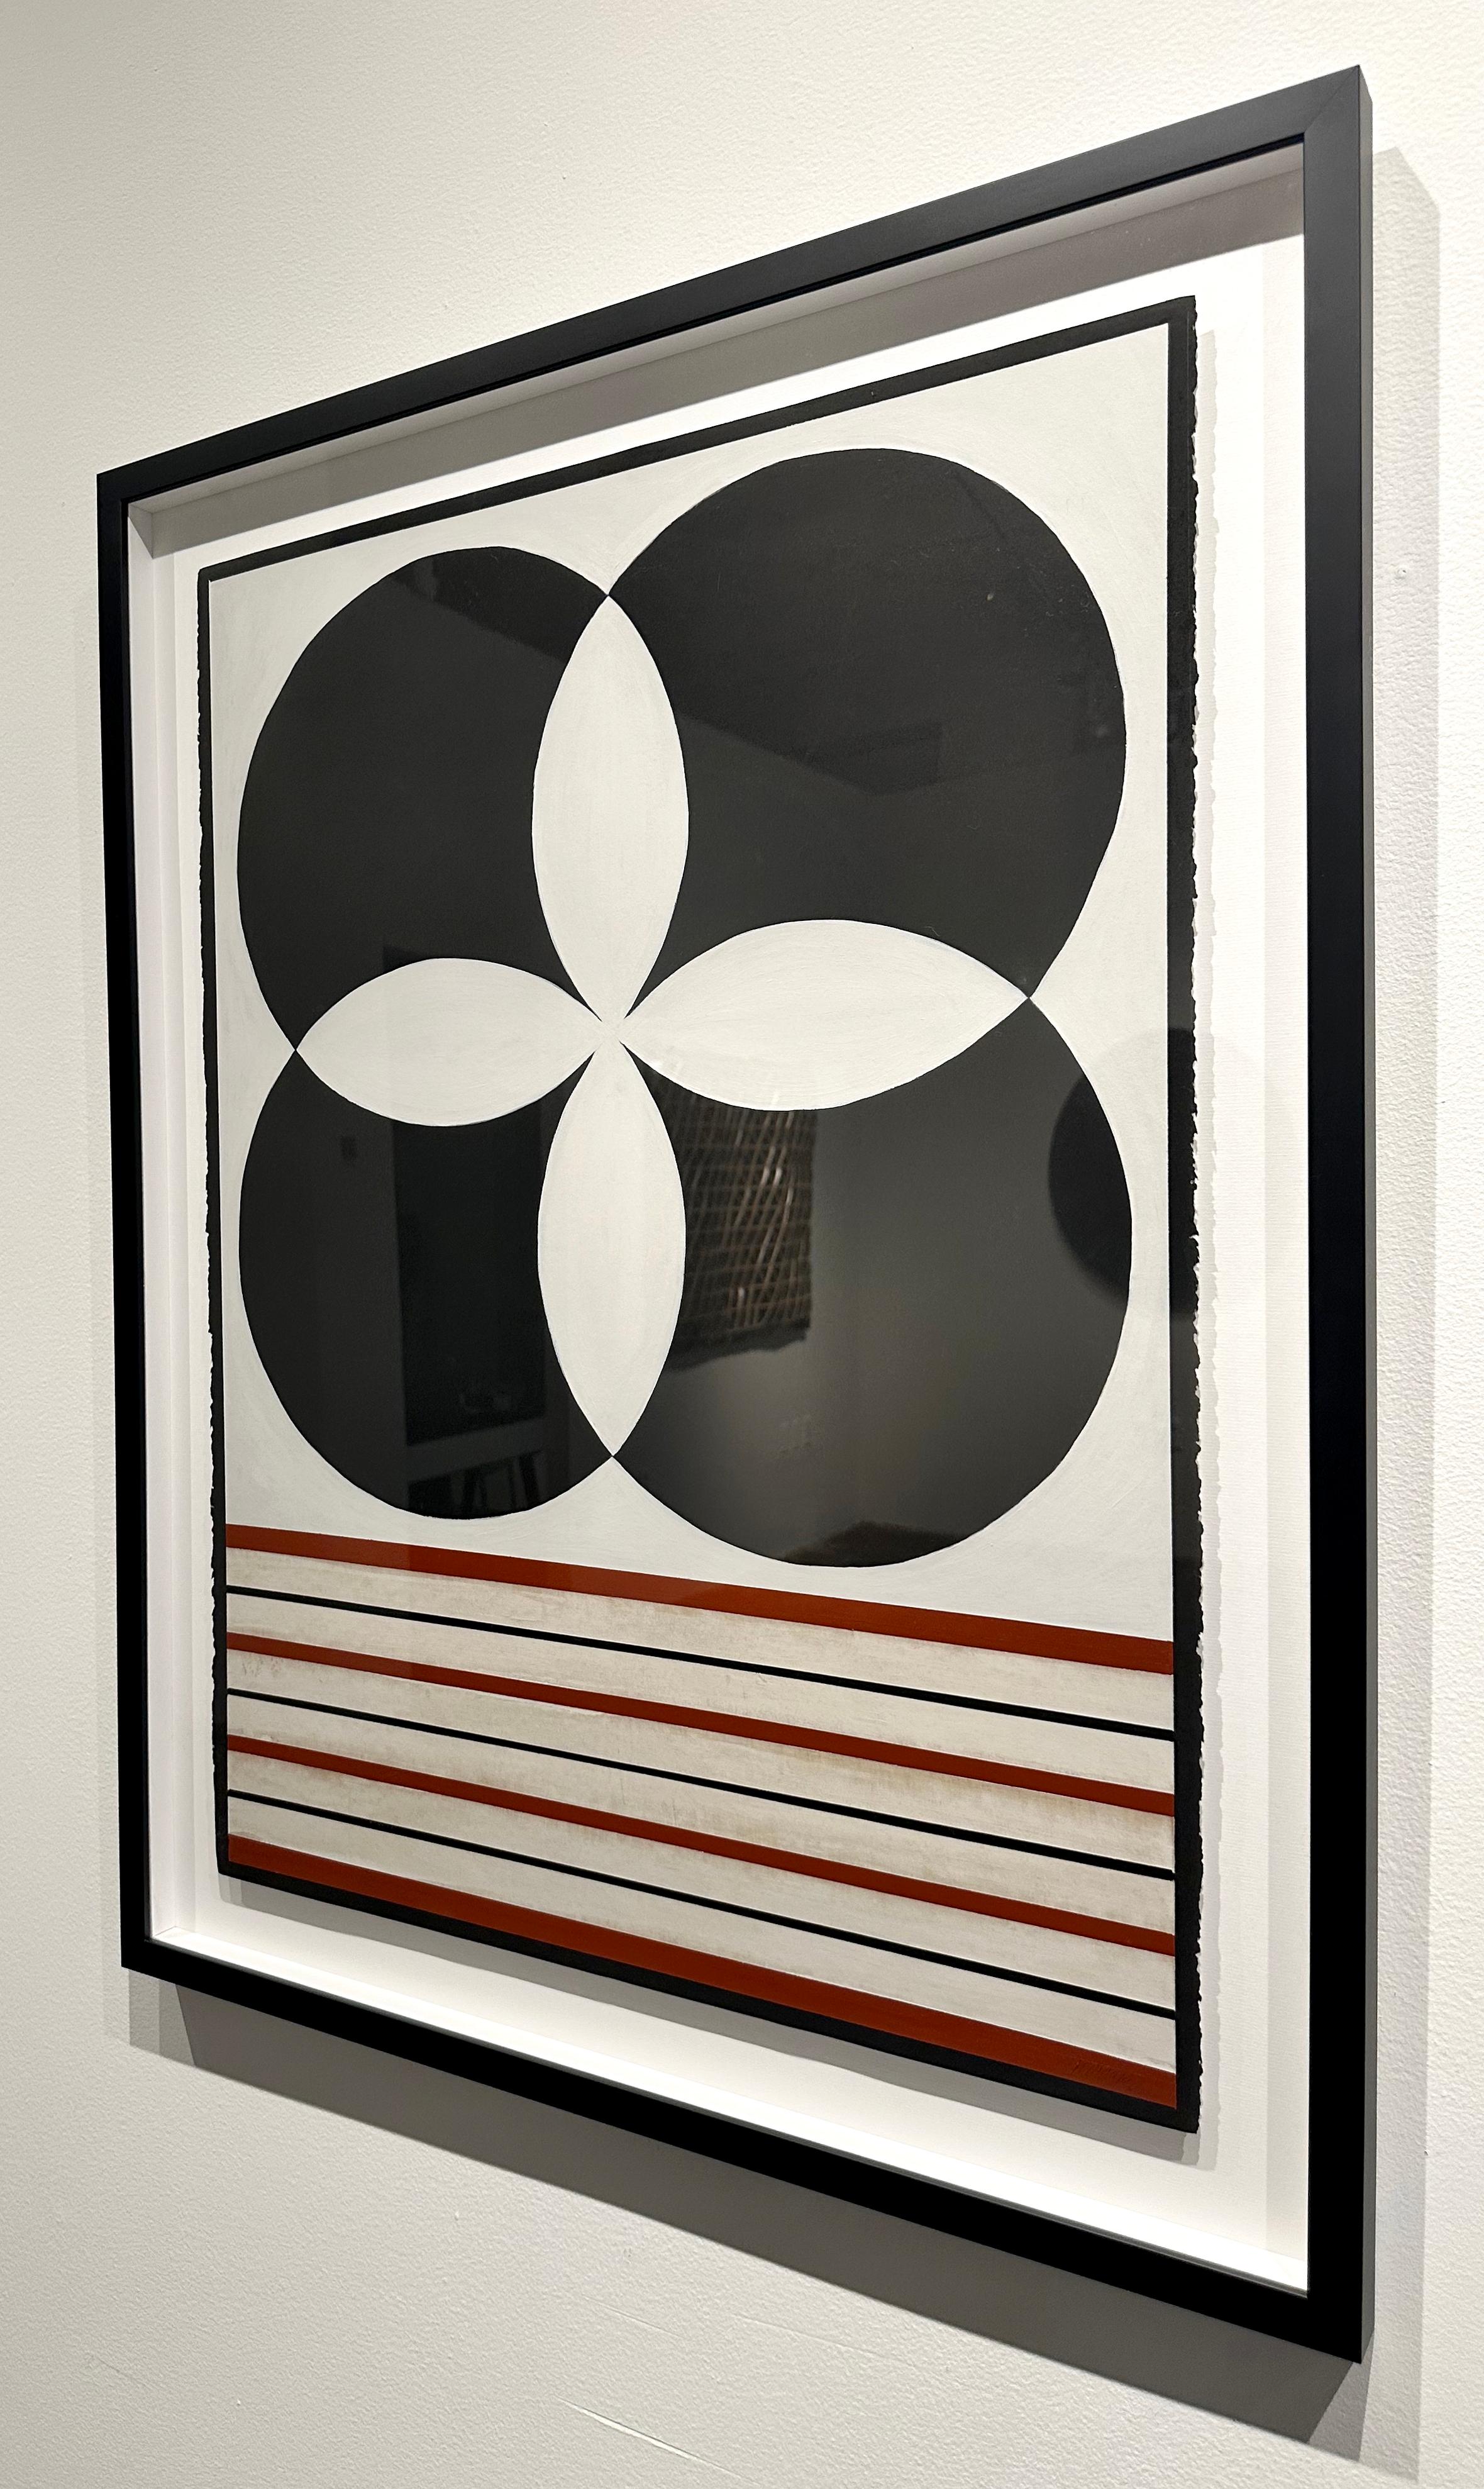 Clover, Black and neutral tones, graphic contemporary work on paper, black frame - Painting by Kazaan Viveiros